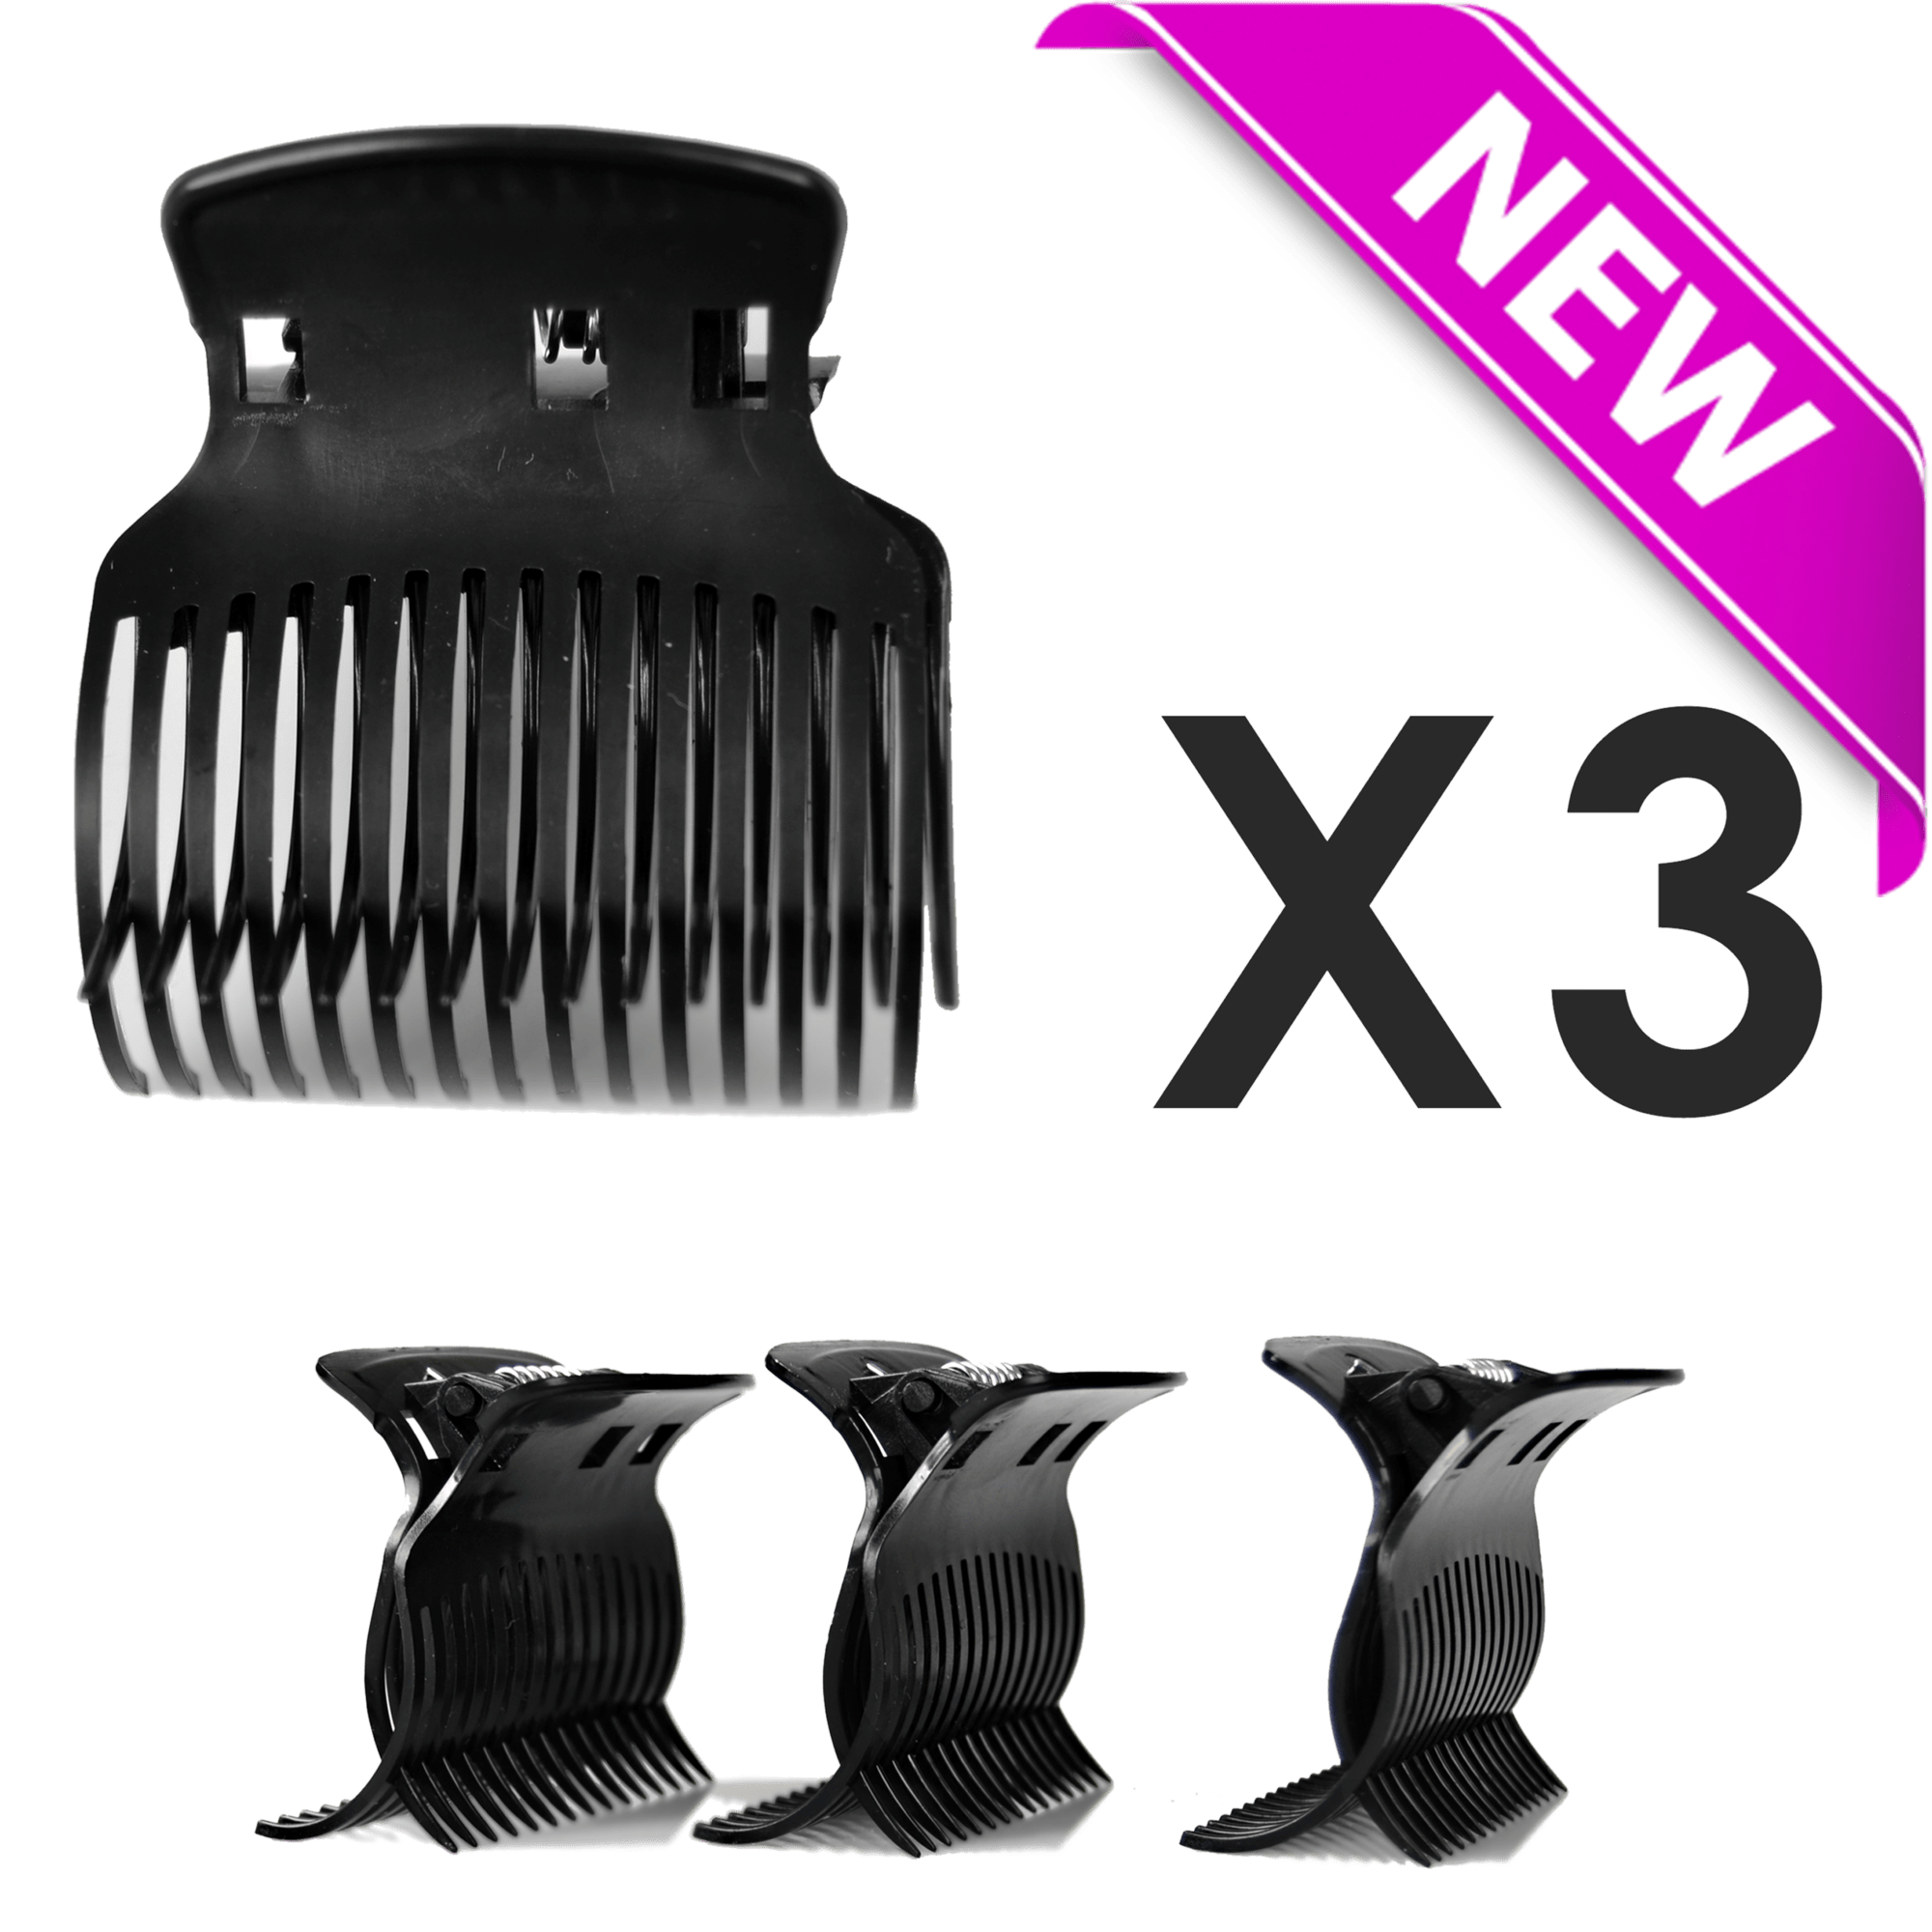 Pack of (3) Hair & Barrel Clips - Click n Curl - Blowout Brush Set with ...